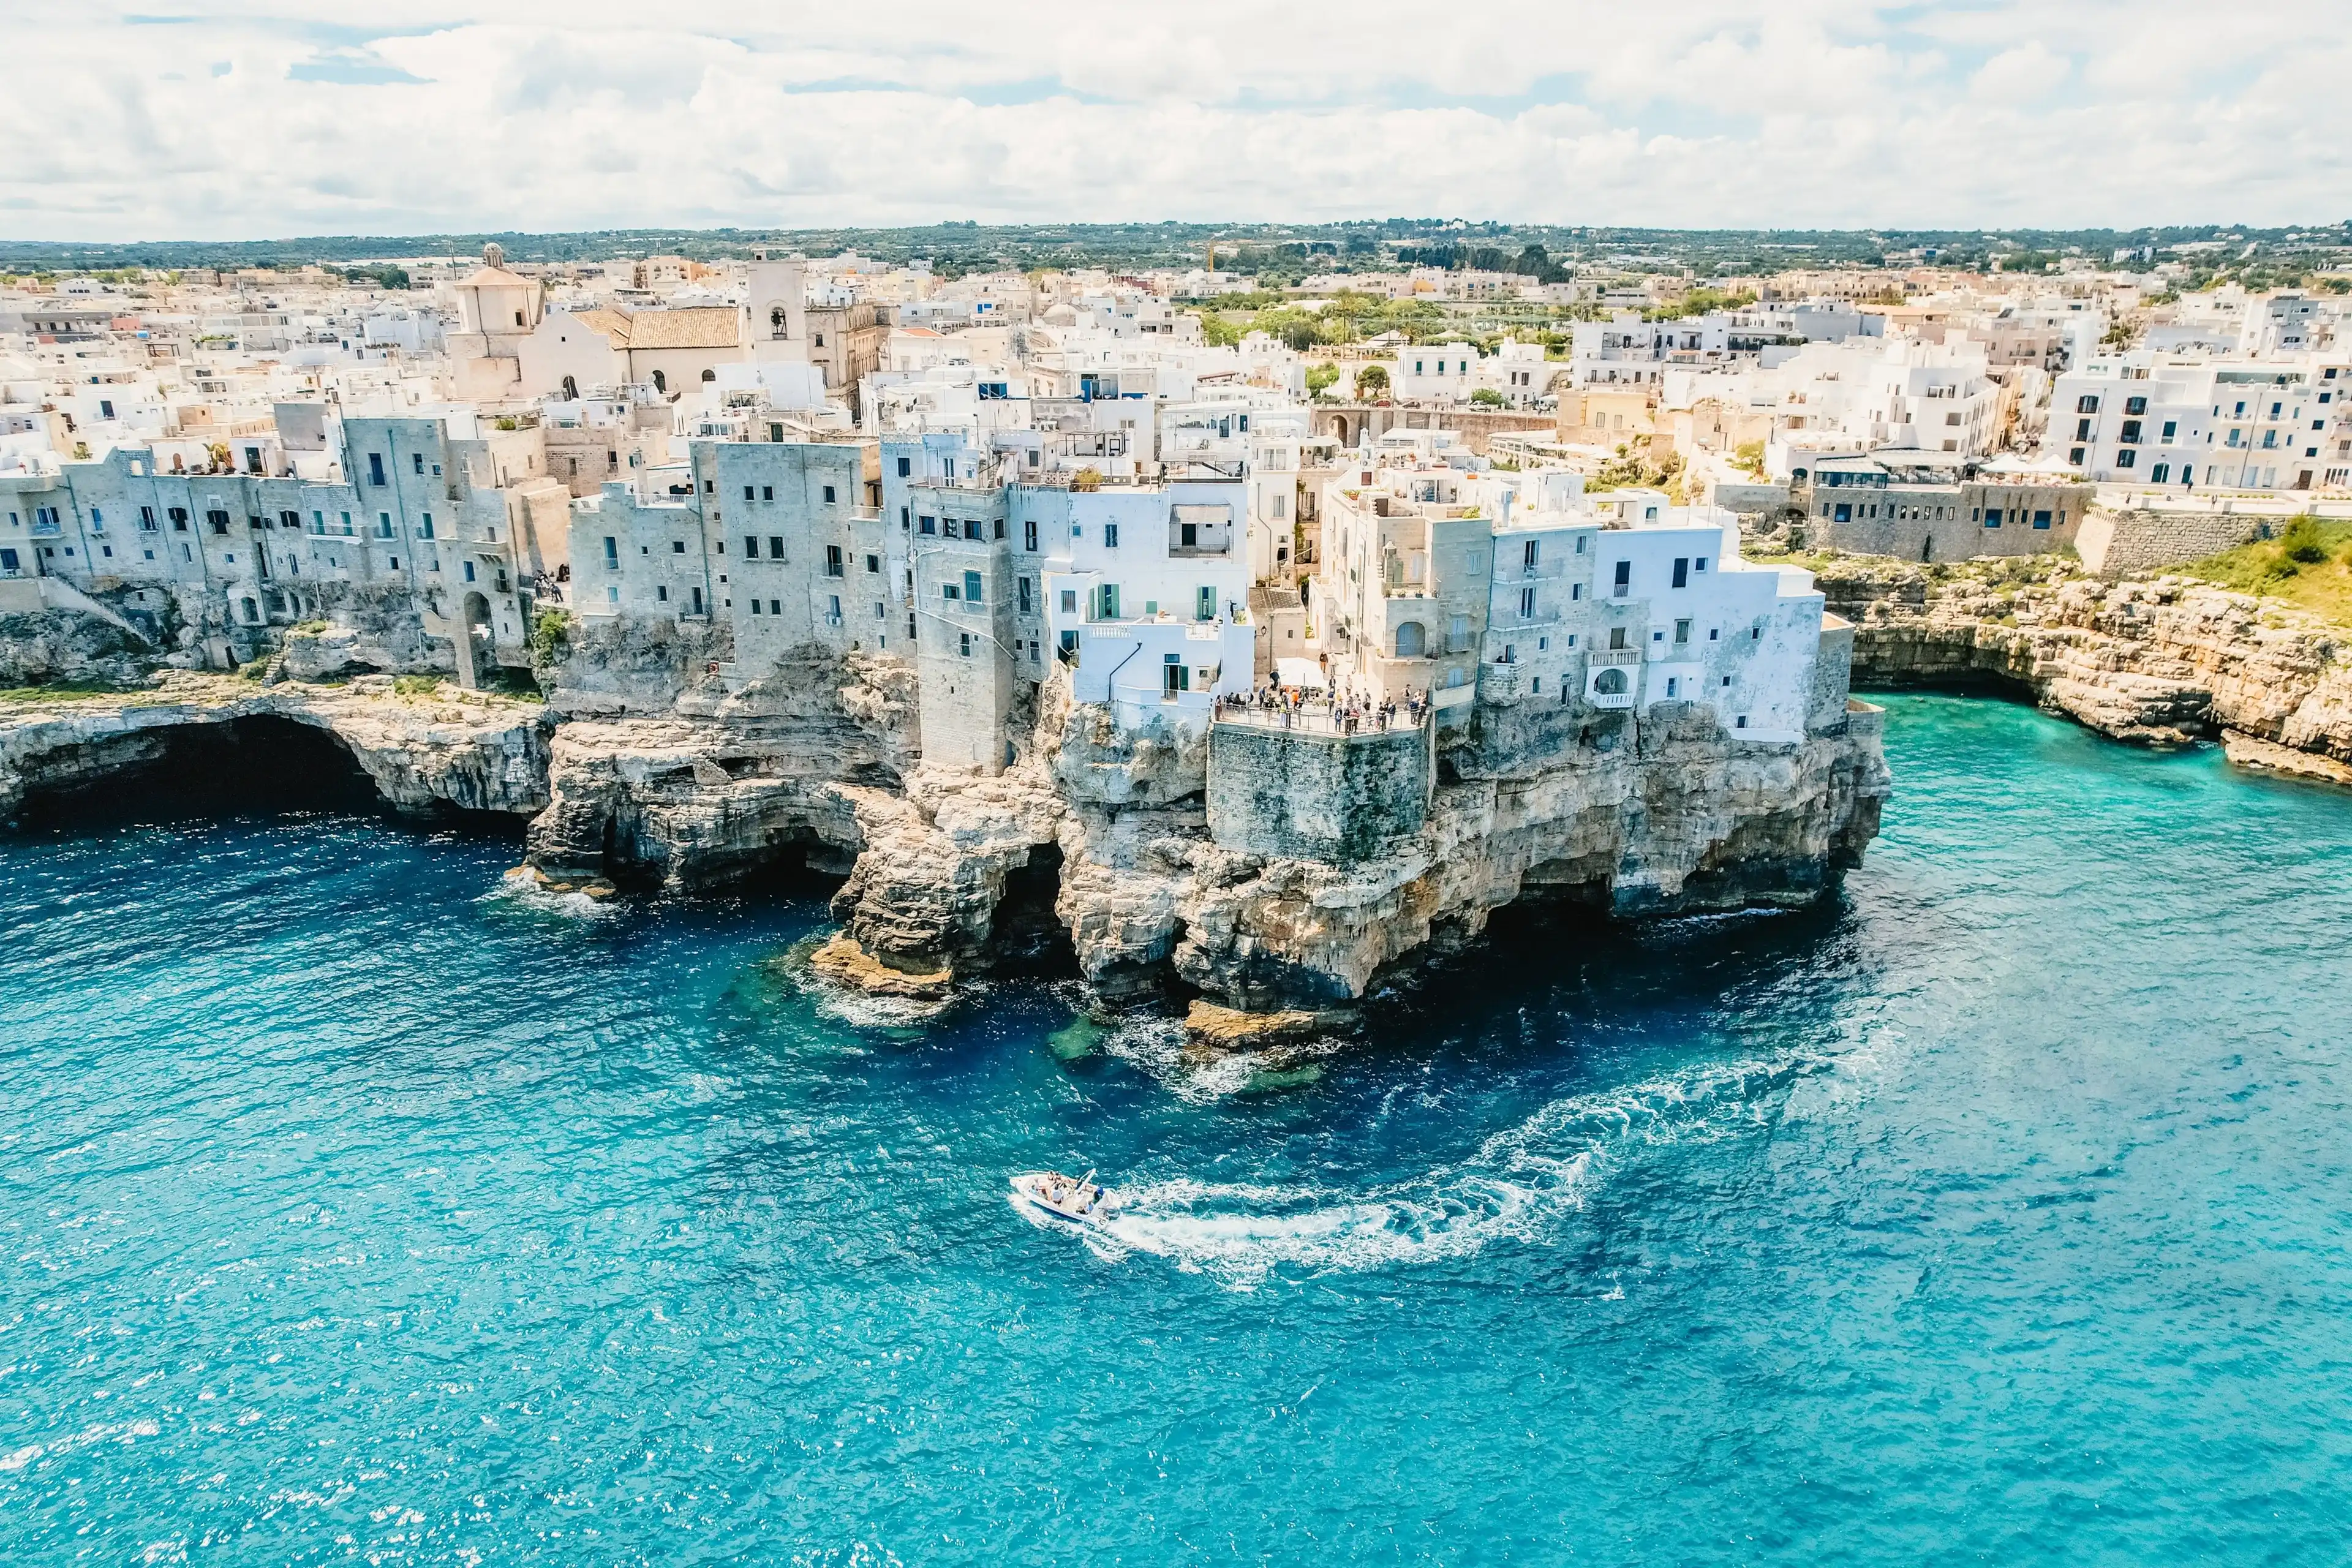 Best Polignano a Mare hotels. Cheap hotels in Polignano a Mare, Italy